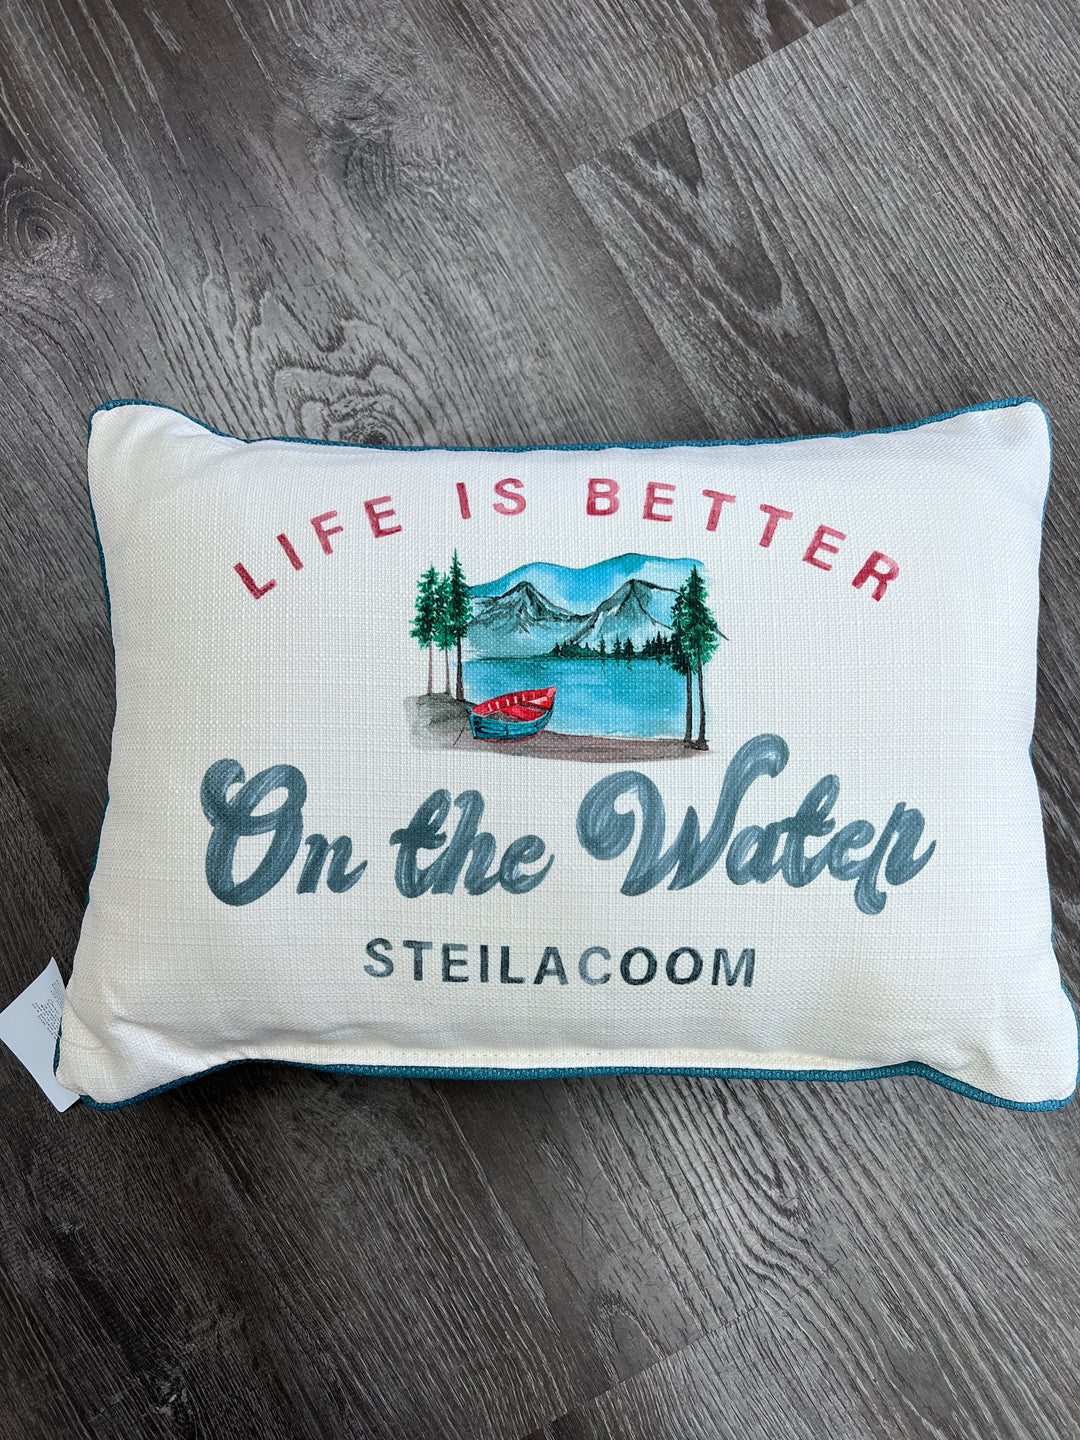 Life Is Better On The Water- Steilacoom Pillow